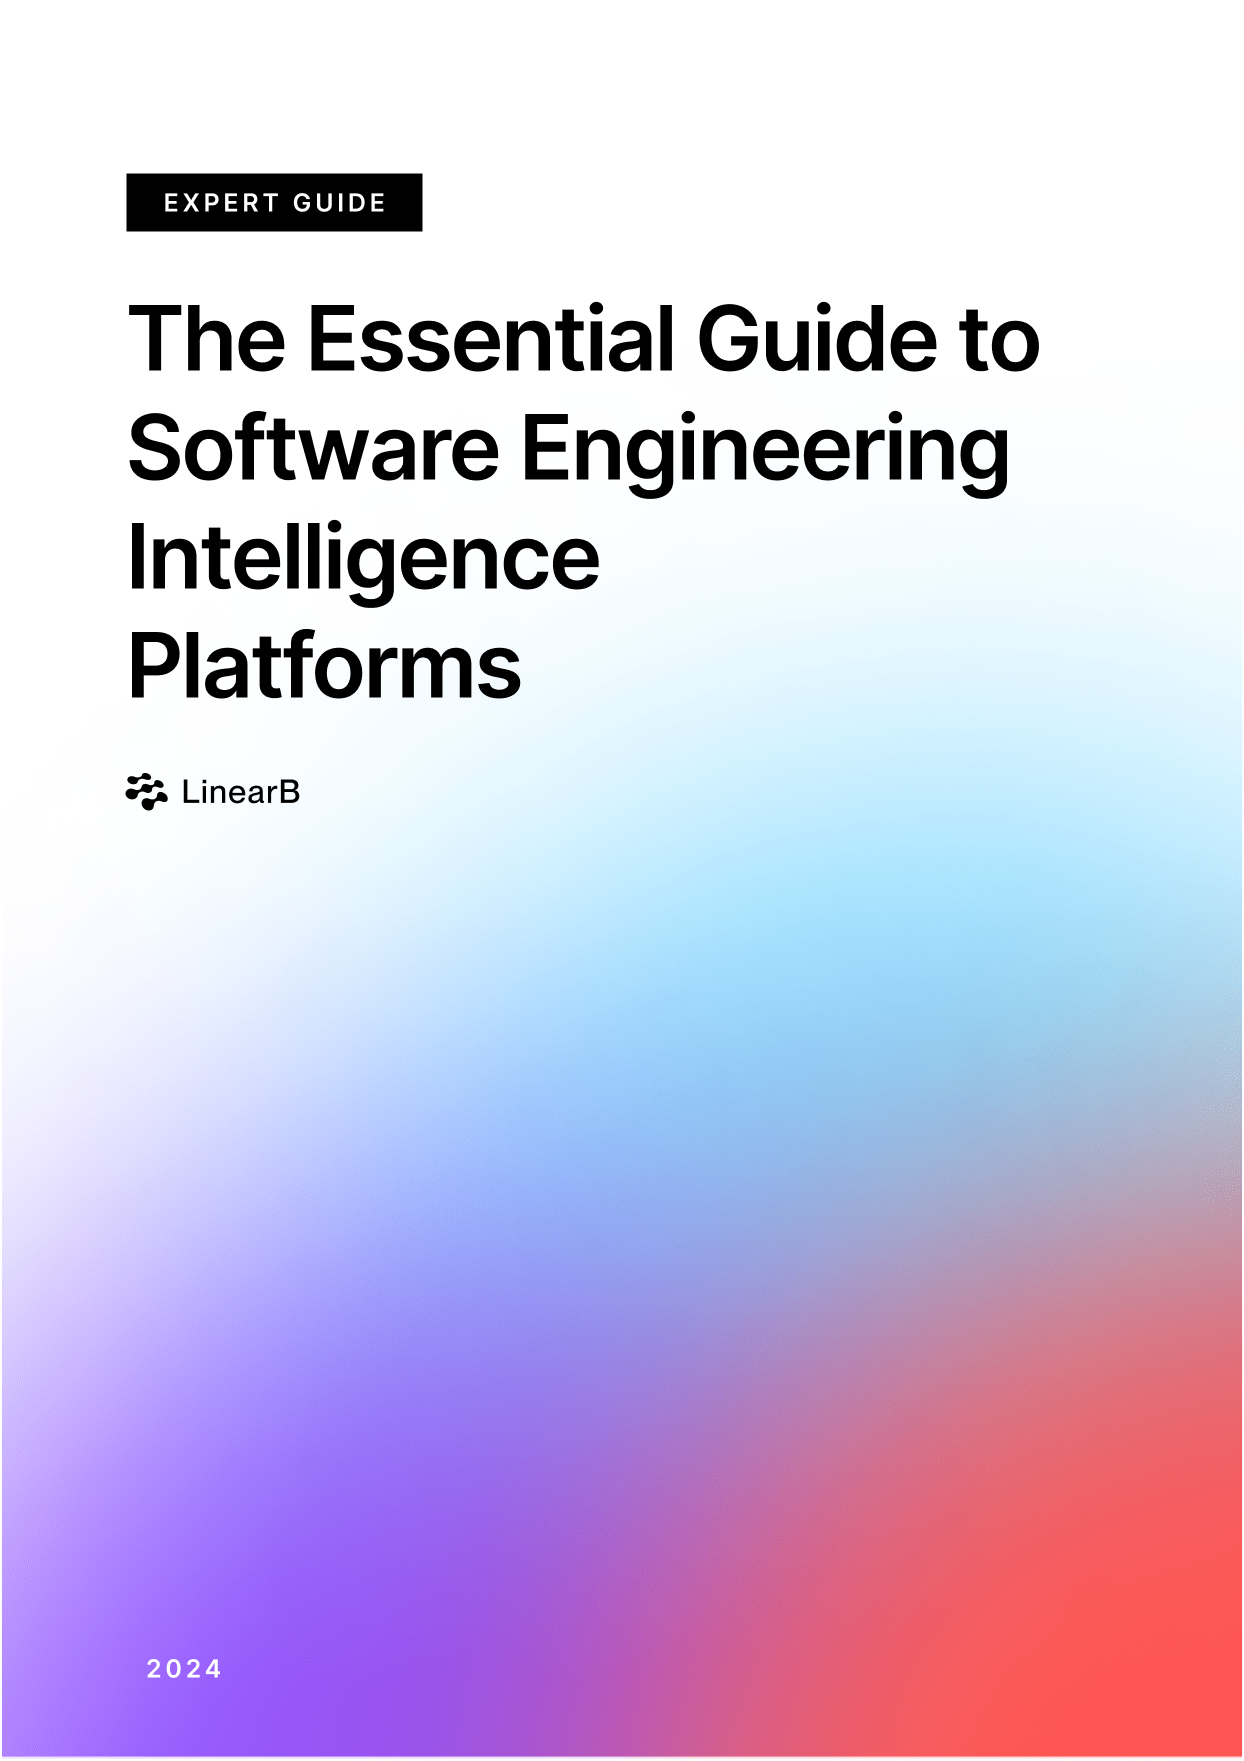 The Essential Guide to Software Engineering Intelligence Platforms